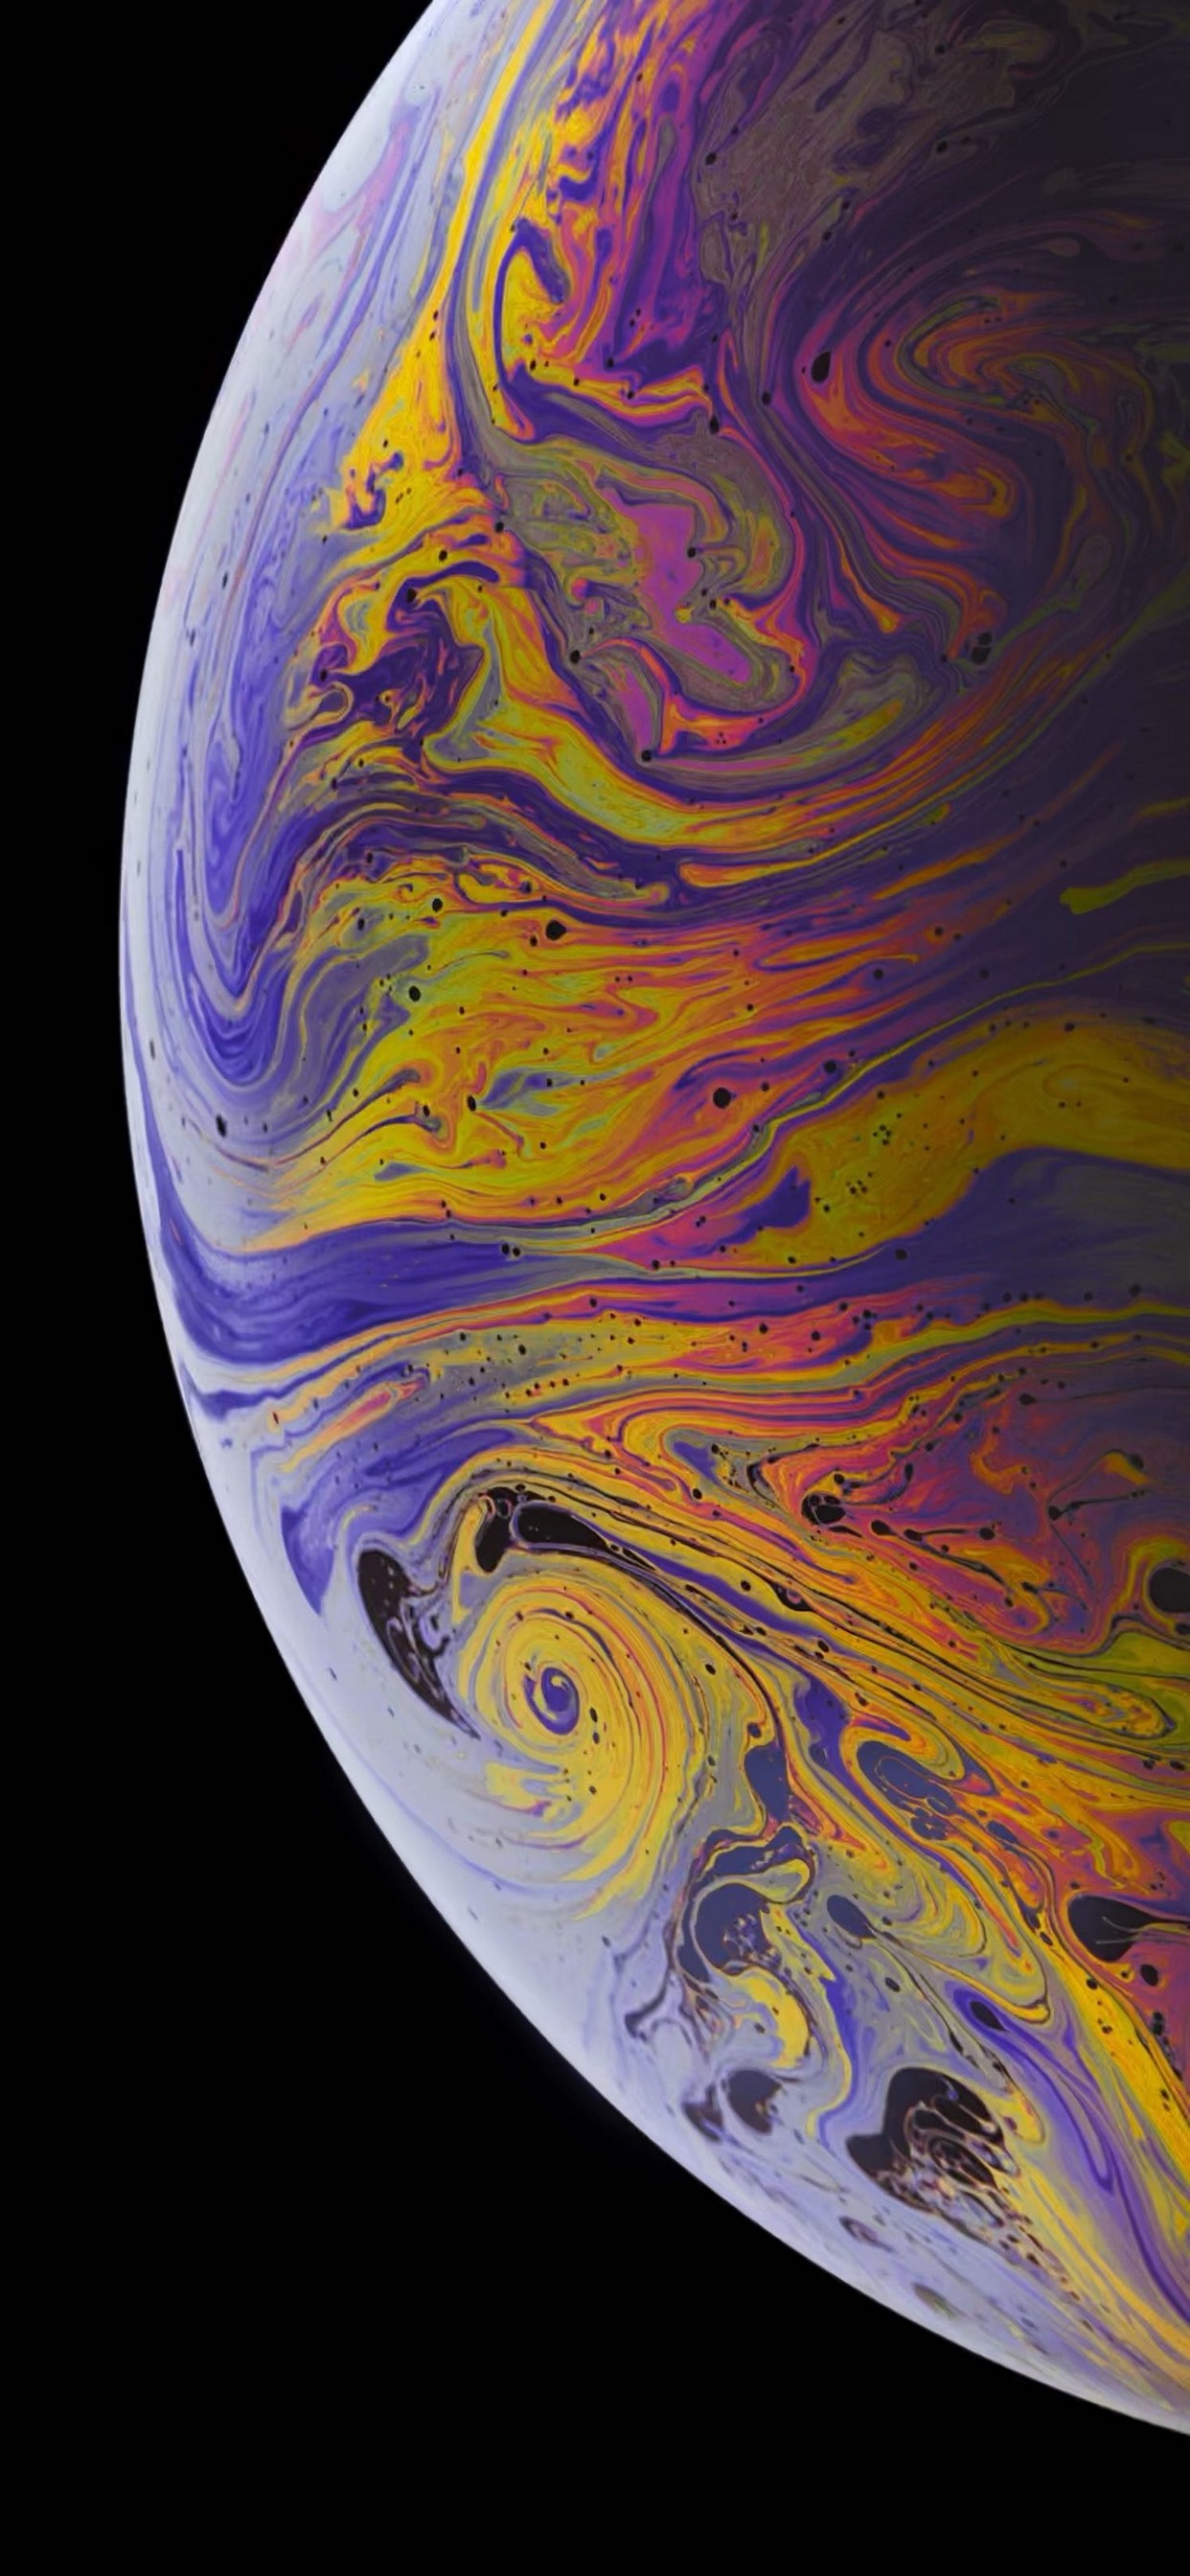 iPhone XS Max Wallpaper HD with high-resolution 1242x2688 pixel. You can set as wallpaper for Apple iPhone X, XS Max, XR, 8, 7, 6, SE, iPad. Enjoy and share your favorite HD wallpapers and background images